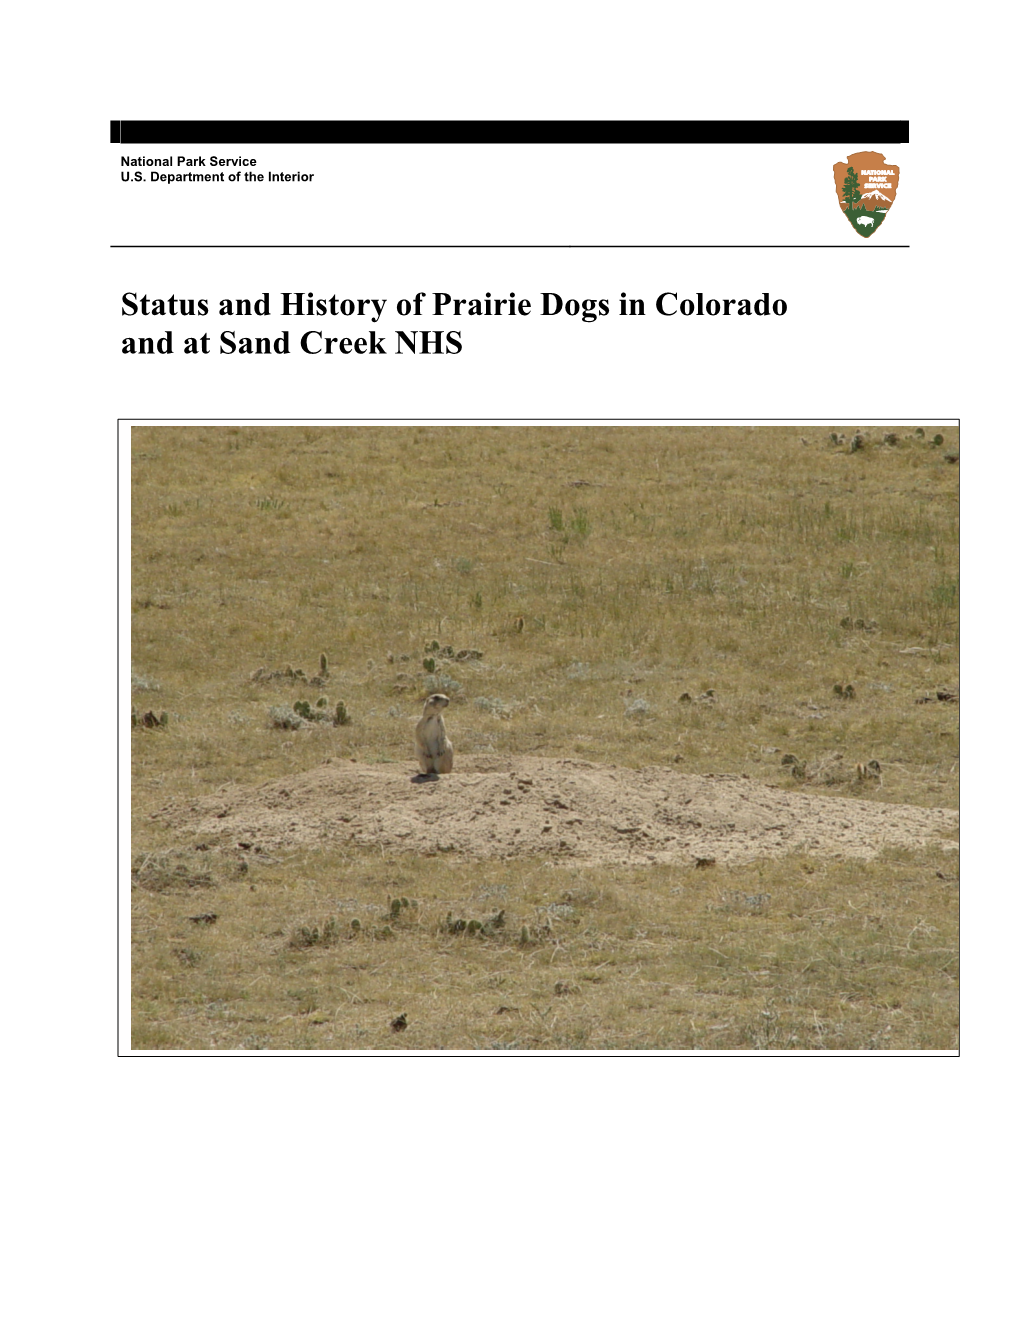 Status and History of Prairie Dogs in Colorado and at Sand Creek NHS